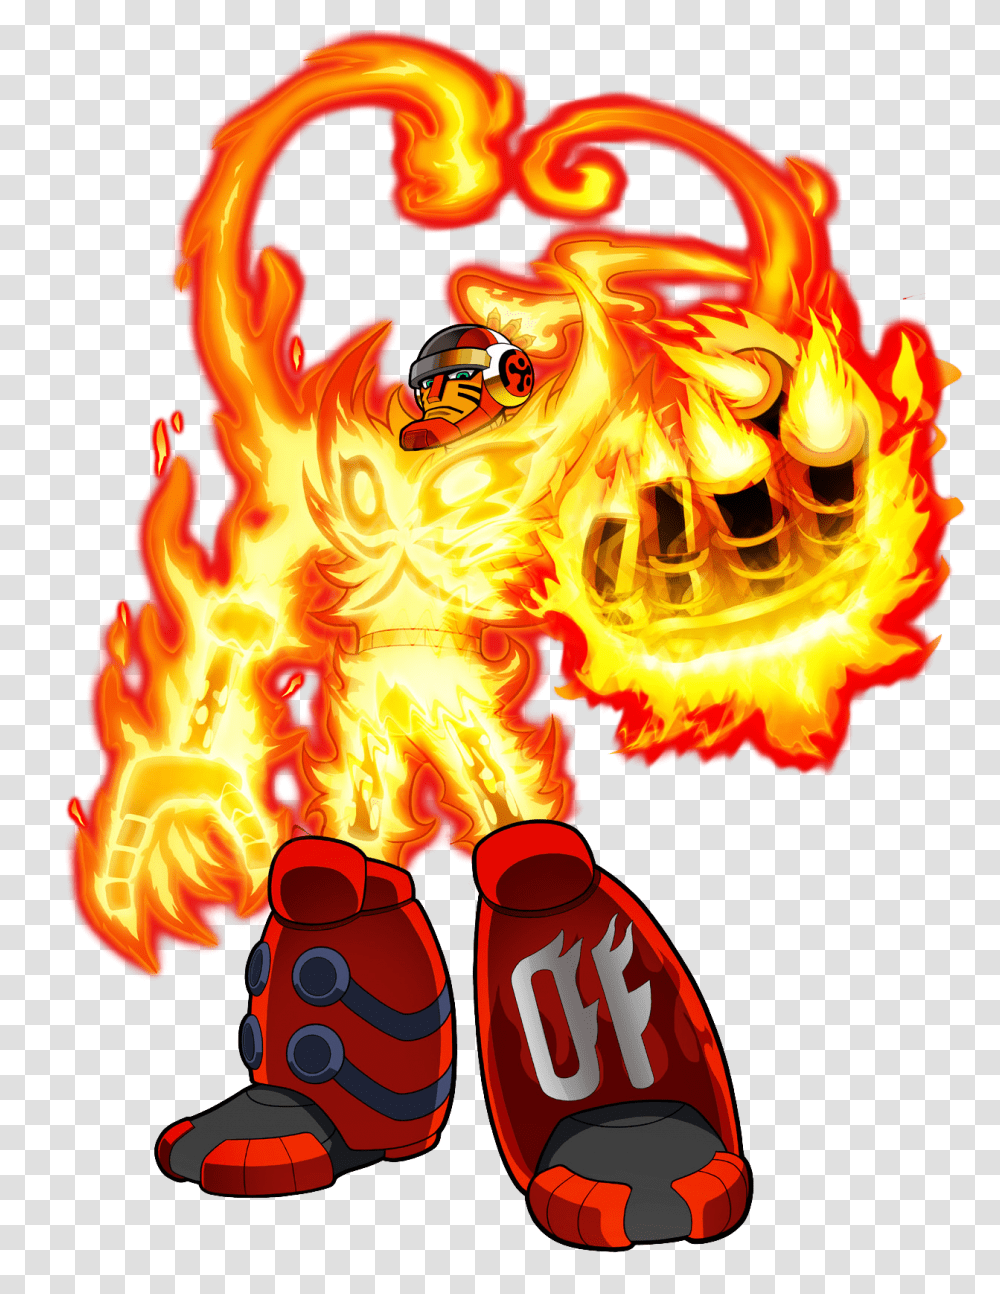 Pyrogen Mighty No Wiki Fandom Powered, Fire, Flame, Bonfire, Flare Transparent Png